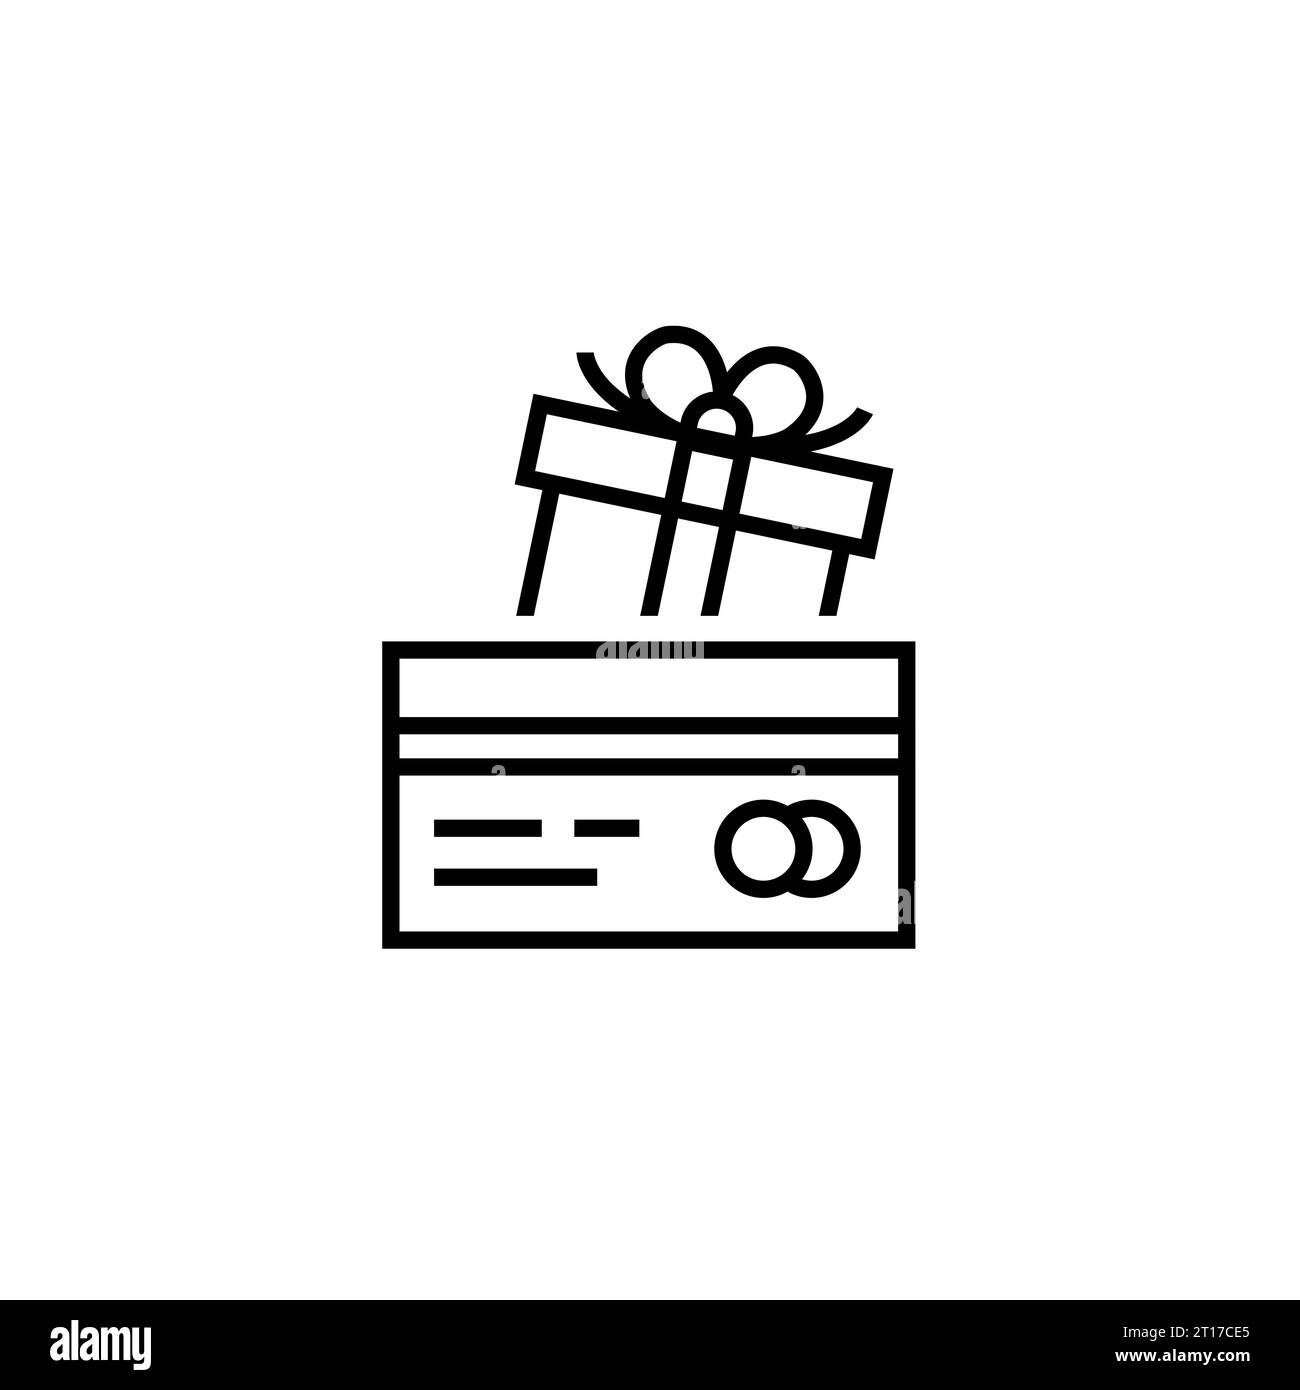 Credit card payment bonus. Linear icon of discount card with gift box. Black simple illustration of certificate, special offer, sale Stock Vector